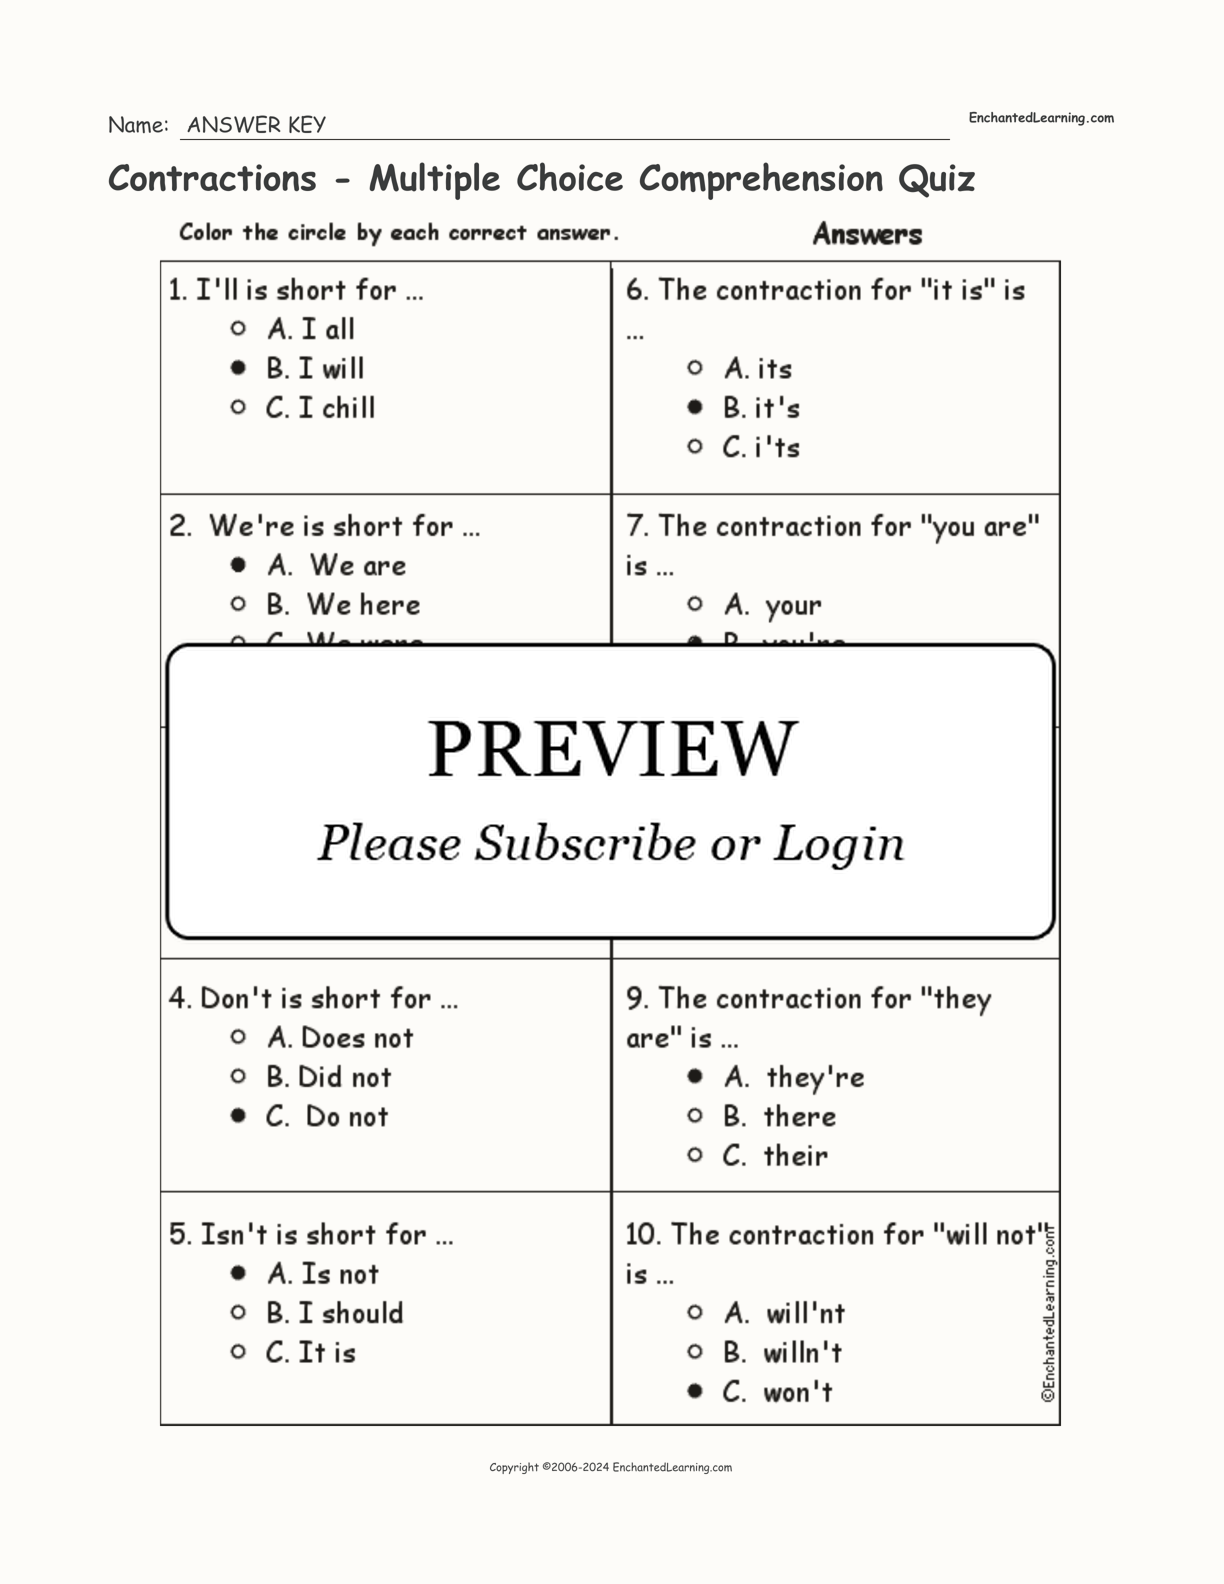 Contractions - Multiple Choice Comprehension Quiz interactive worksheet page 2